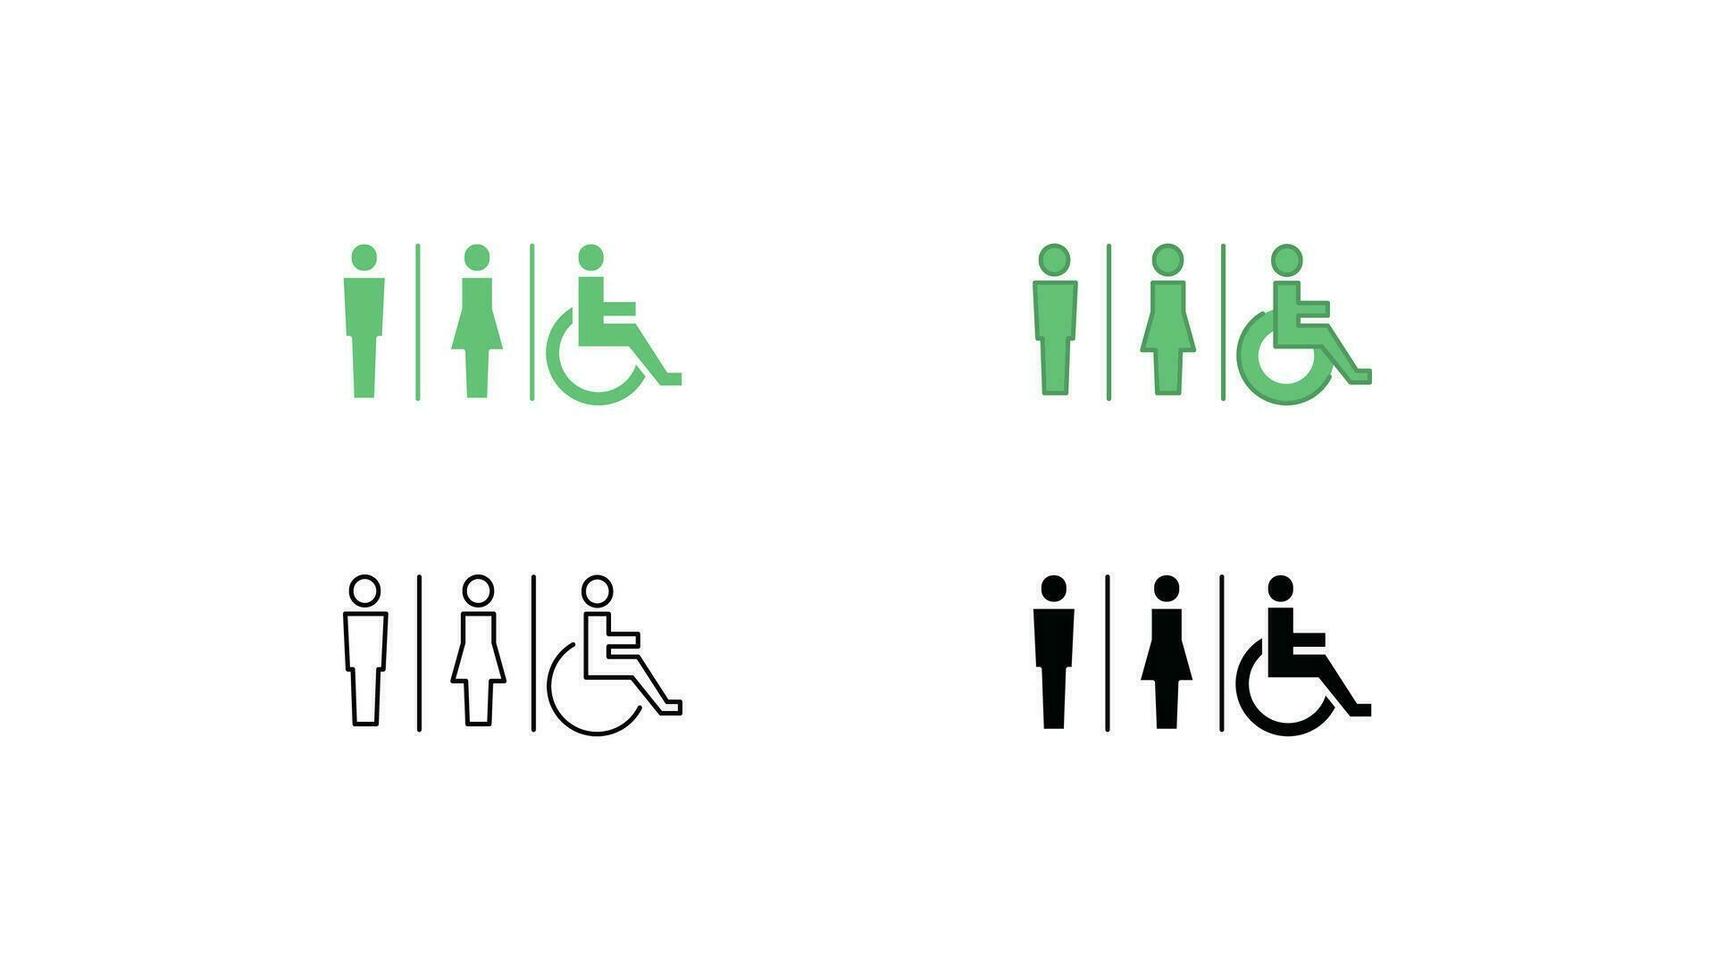 Toilet signage set. Outdoor sign of public toilet or restroom access for men, women and disabled. Toilet, bathroom, wc icon. Vector illustration. Design on white background. EPS 10.